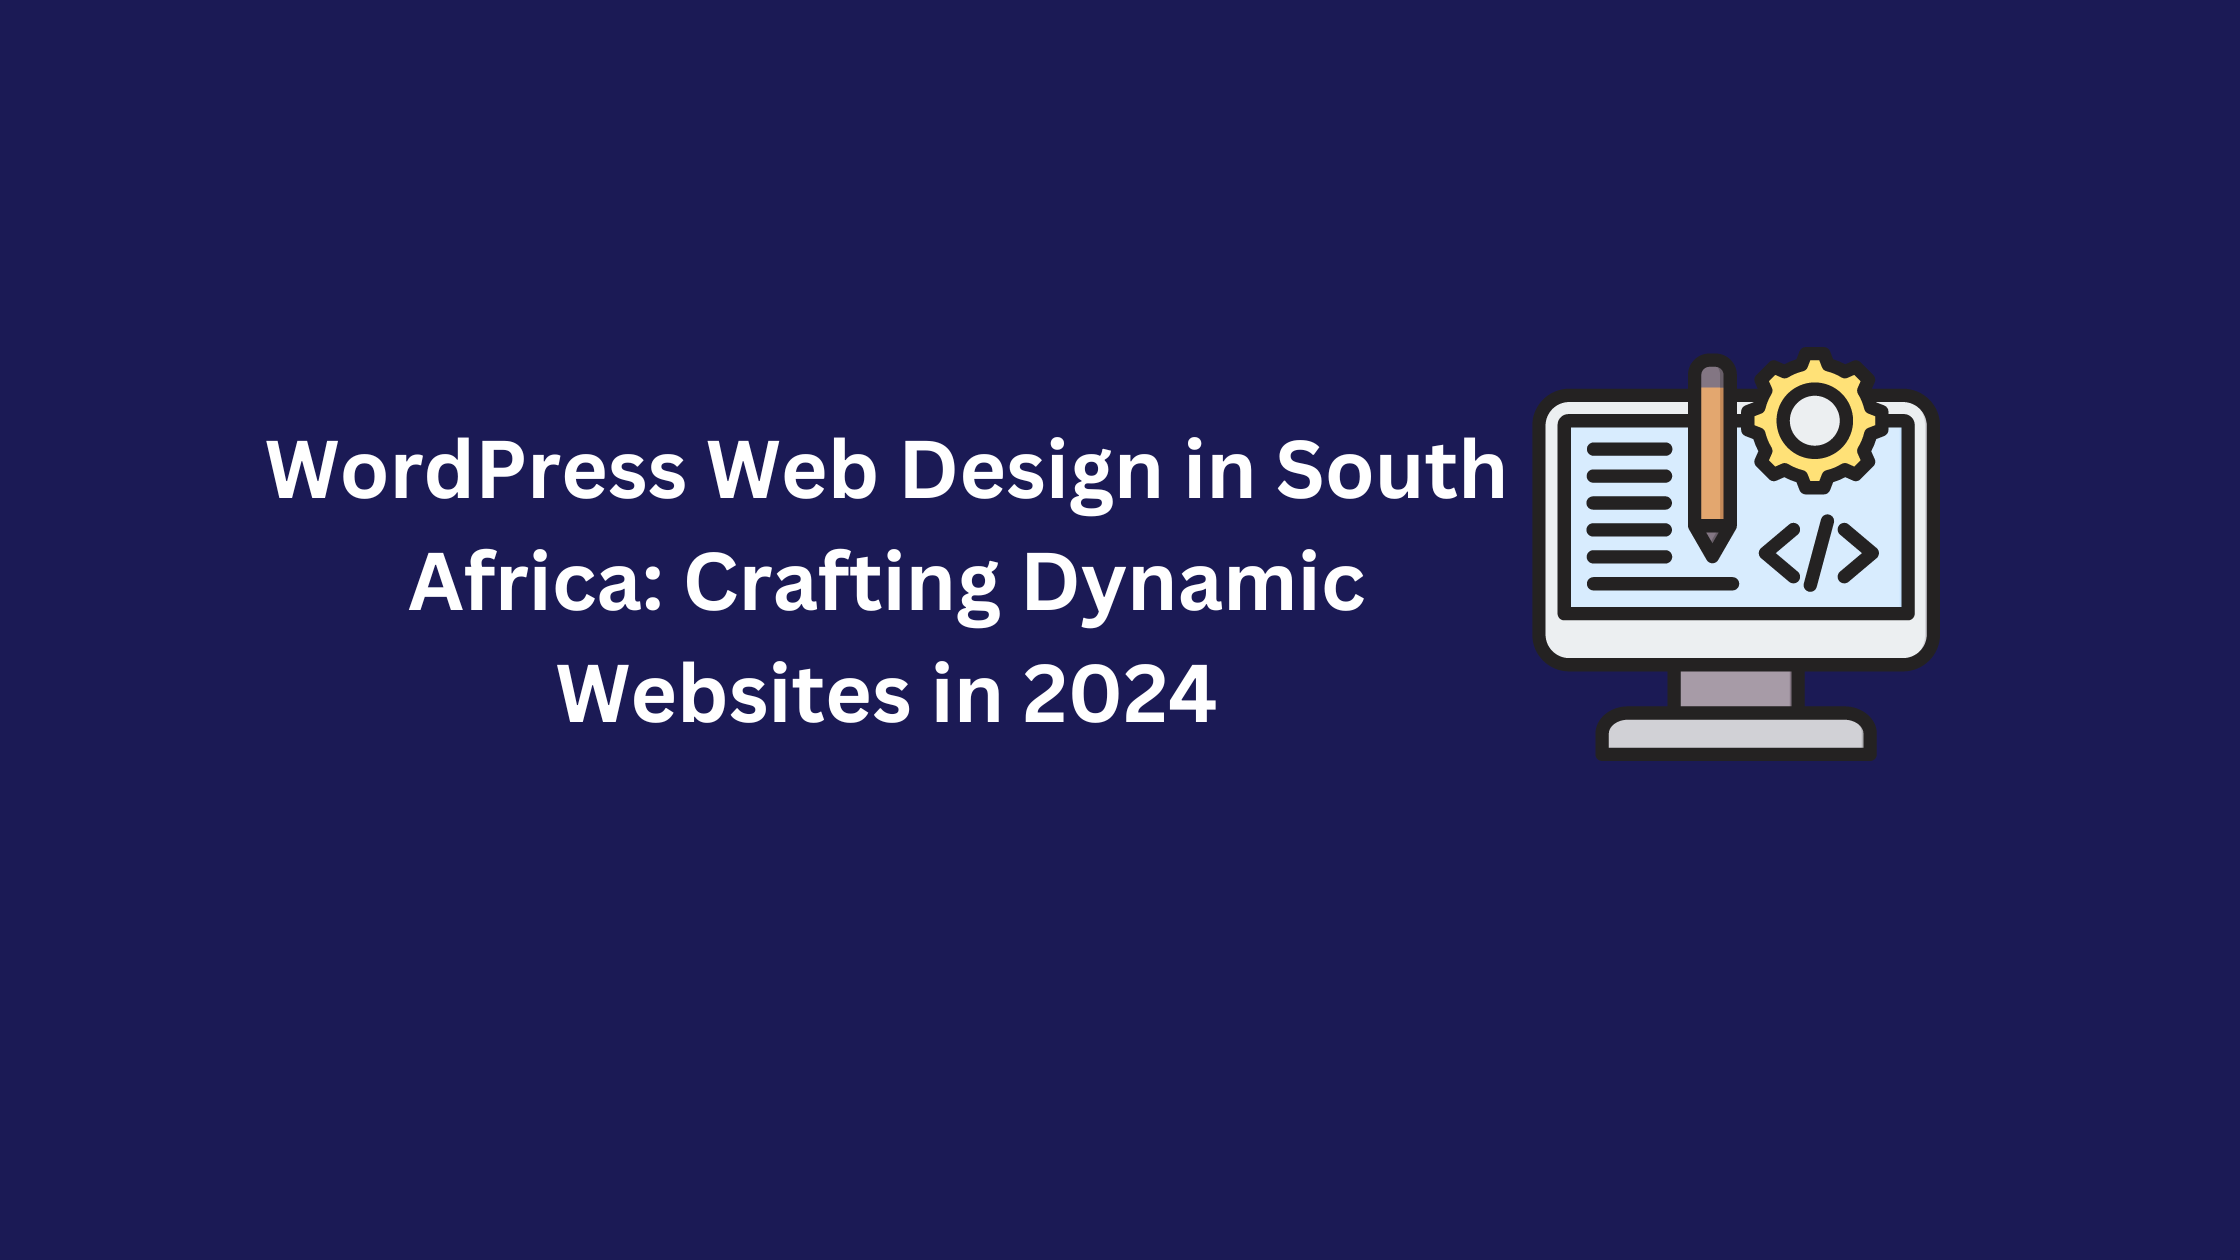 WordPress Web Design in South Africa: Crafting Dynamic Websites in 2024